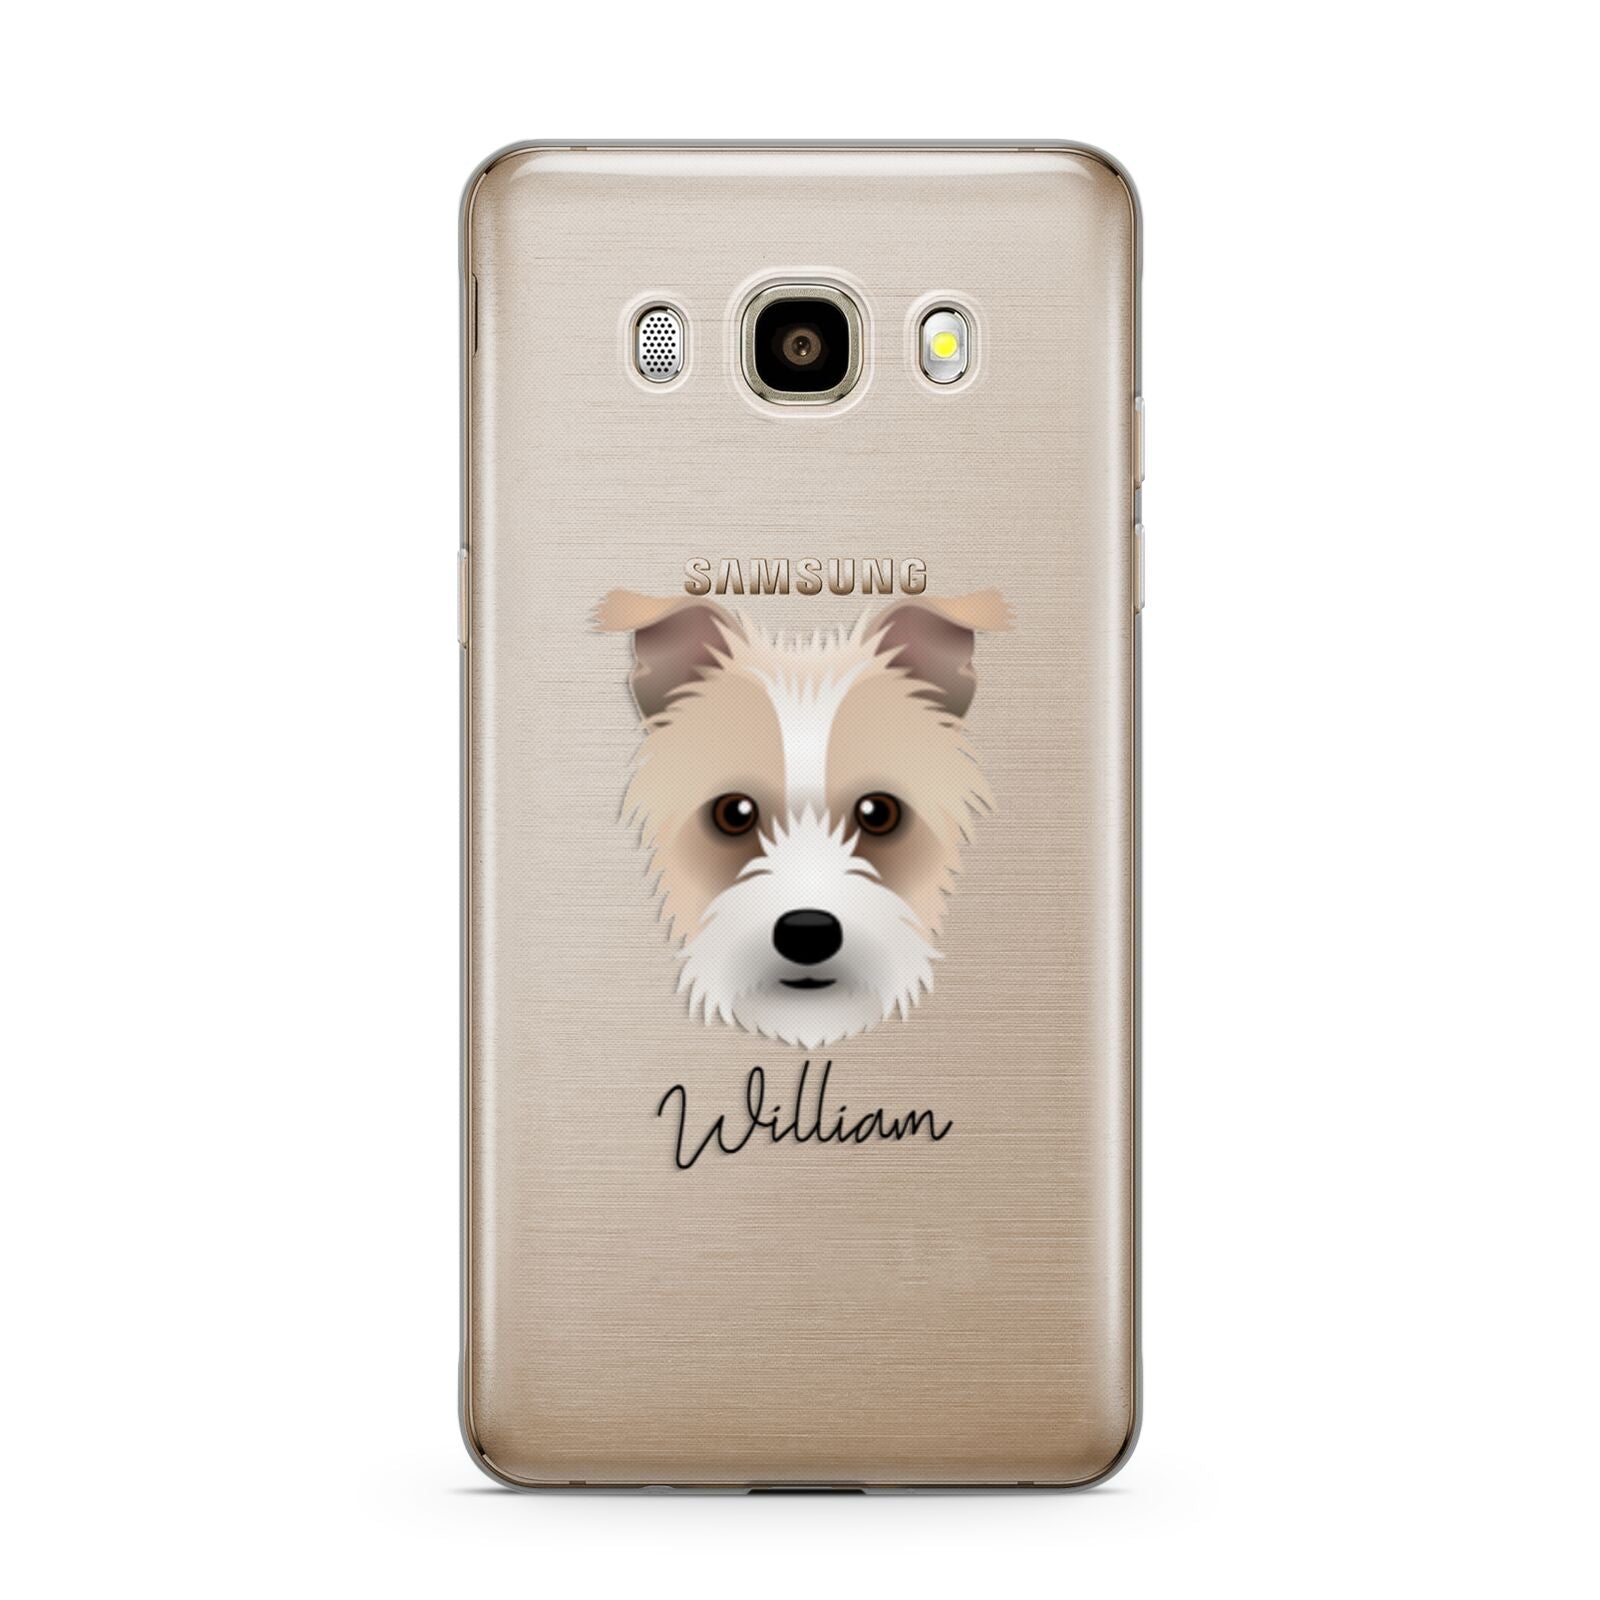 Sporting Lucas Terrier Personalised Samsung Galaxy J7 2016 Case on gold phone